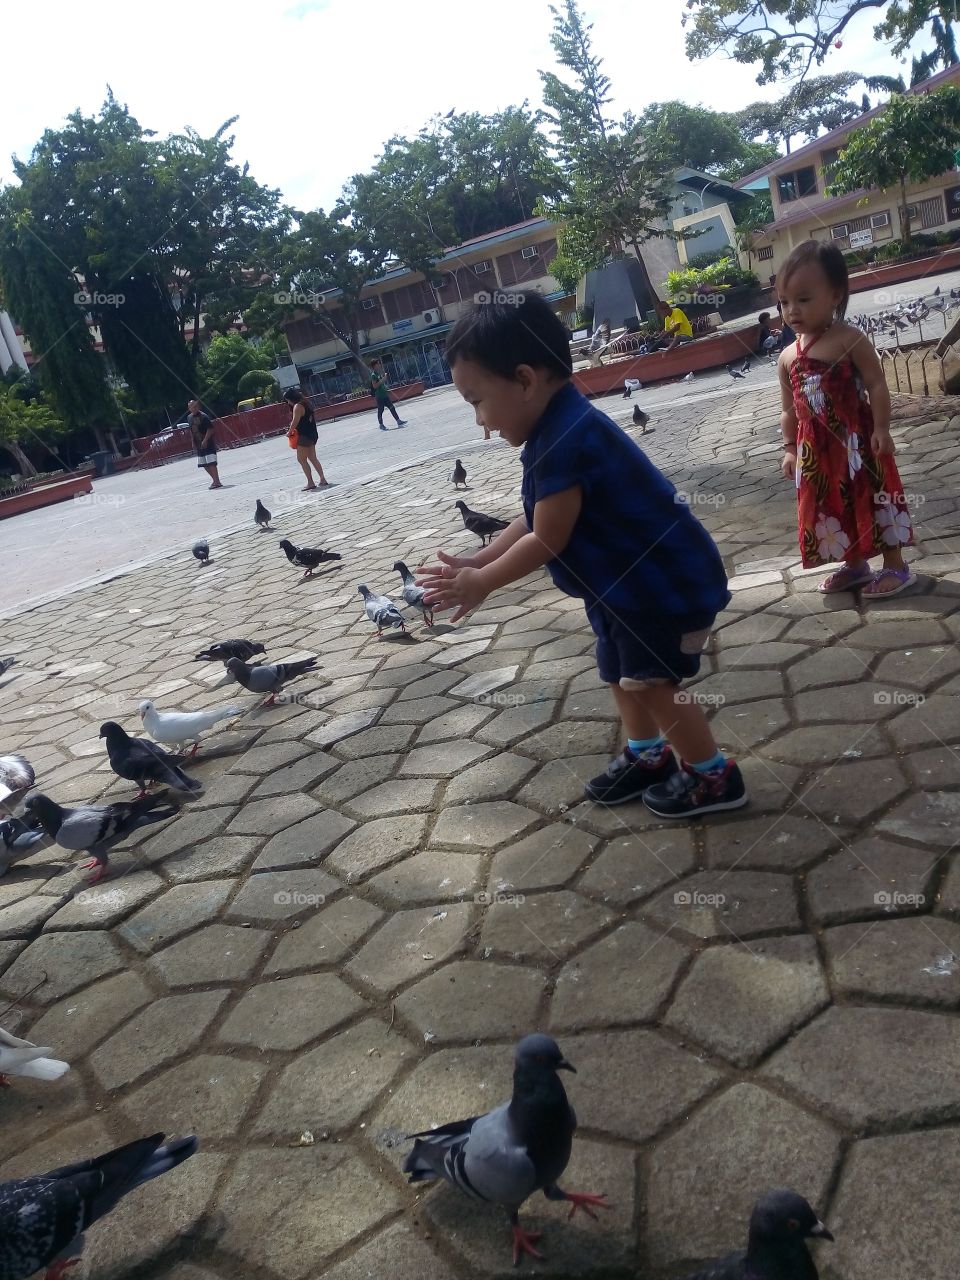 Kids and Doves